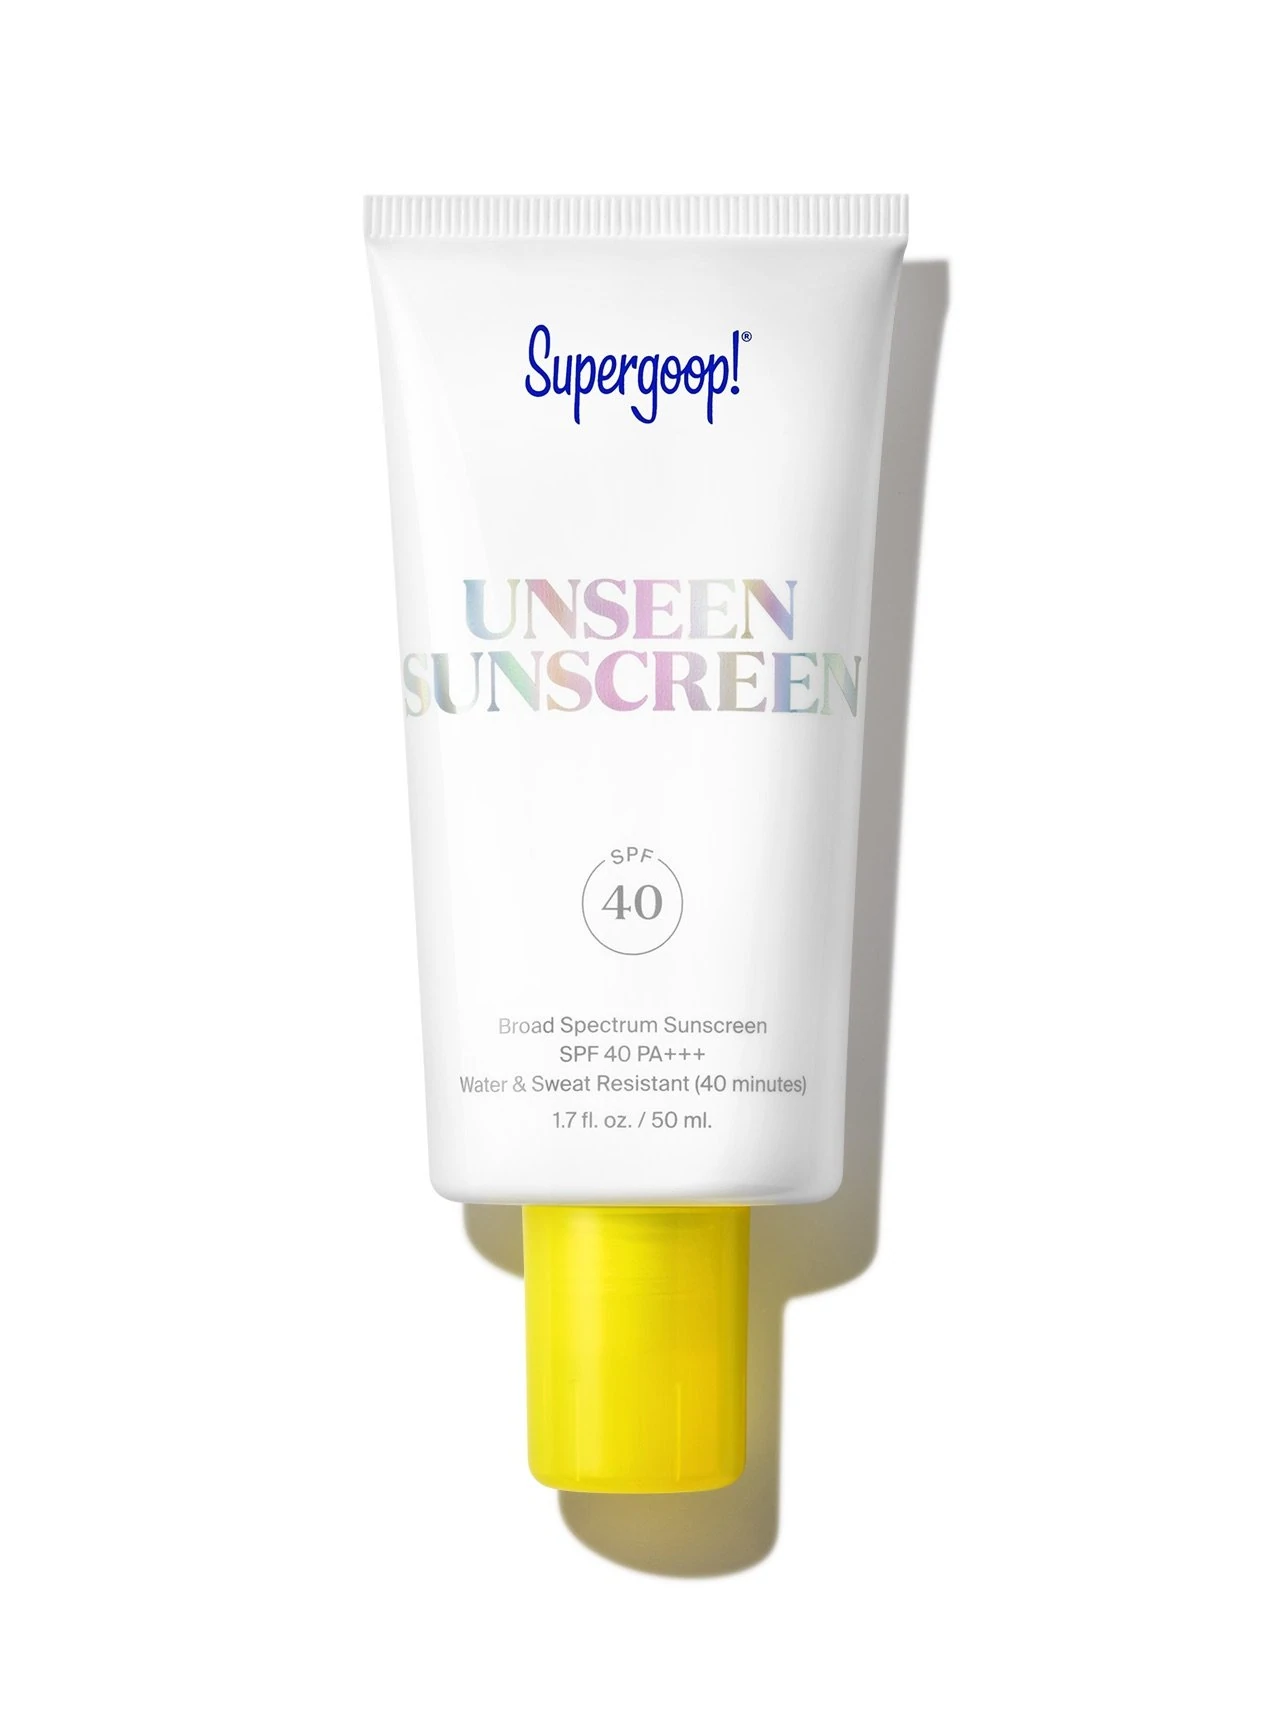 FEMMENORDIC's choice in the Supergoop vs Tula sunscreen comparison, the Supergoop Unseen Sunscreen